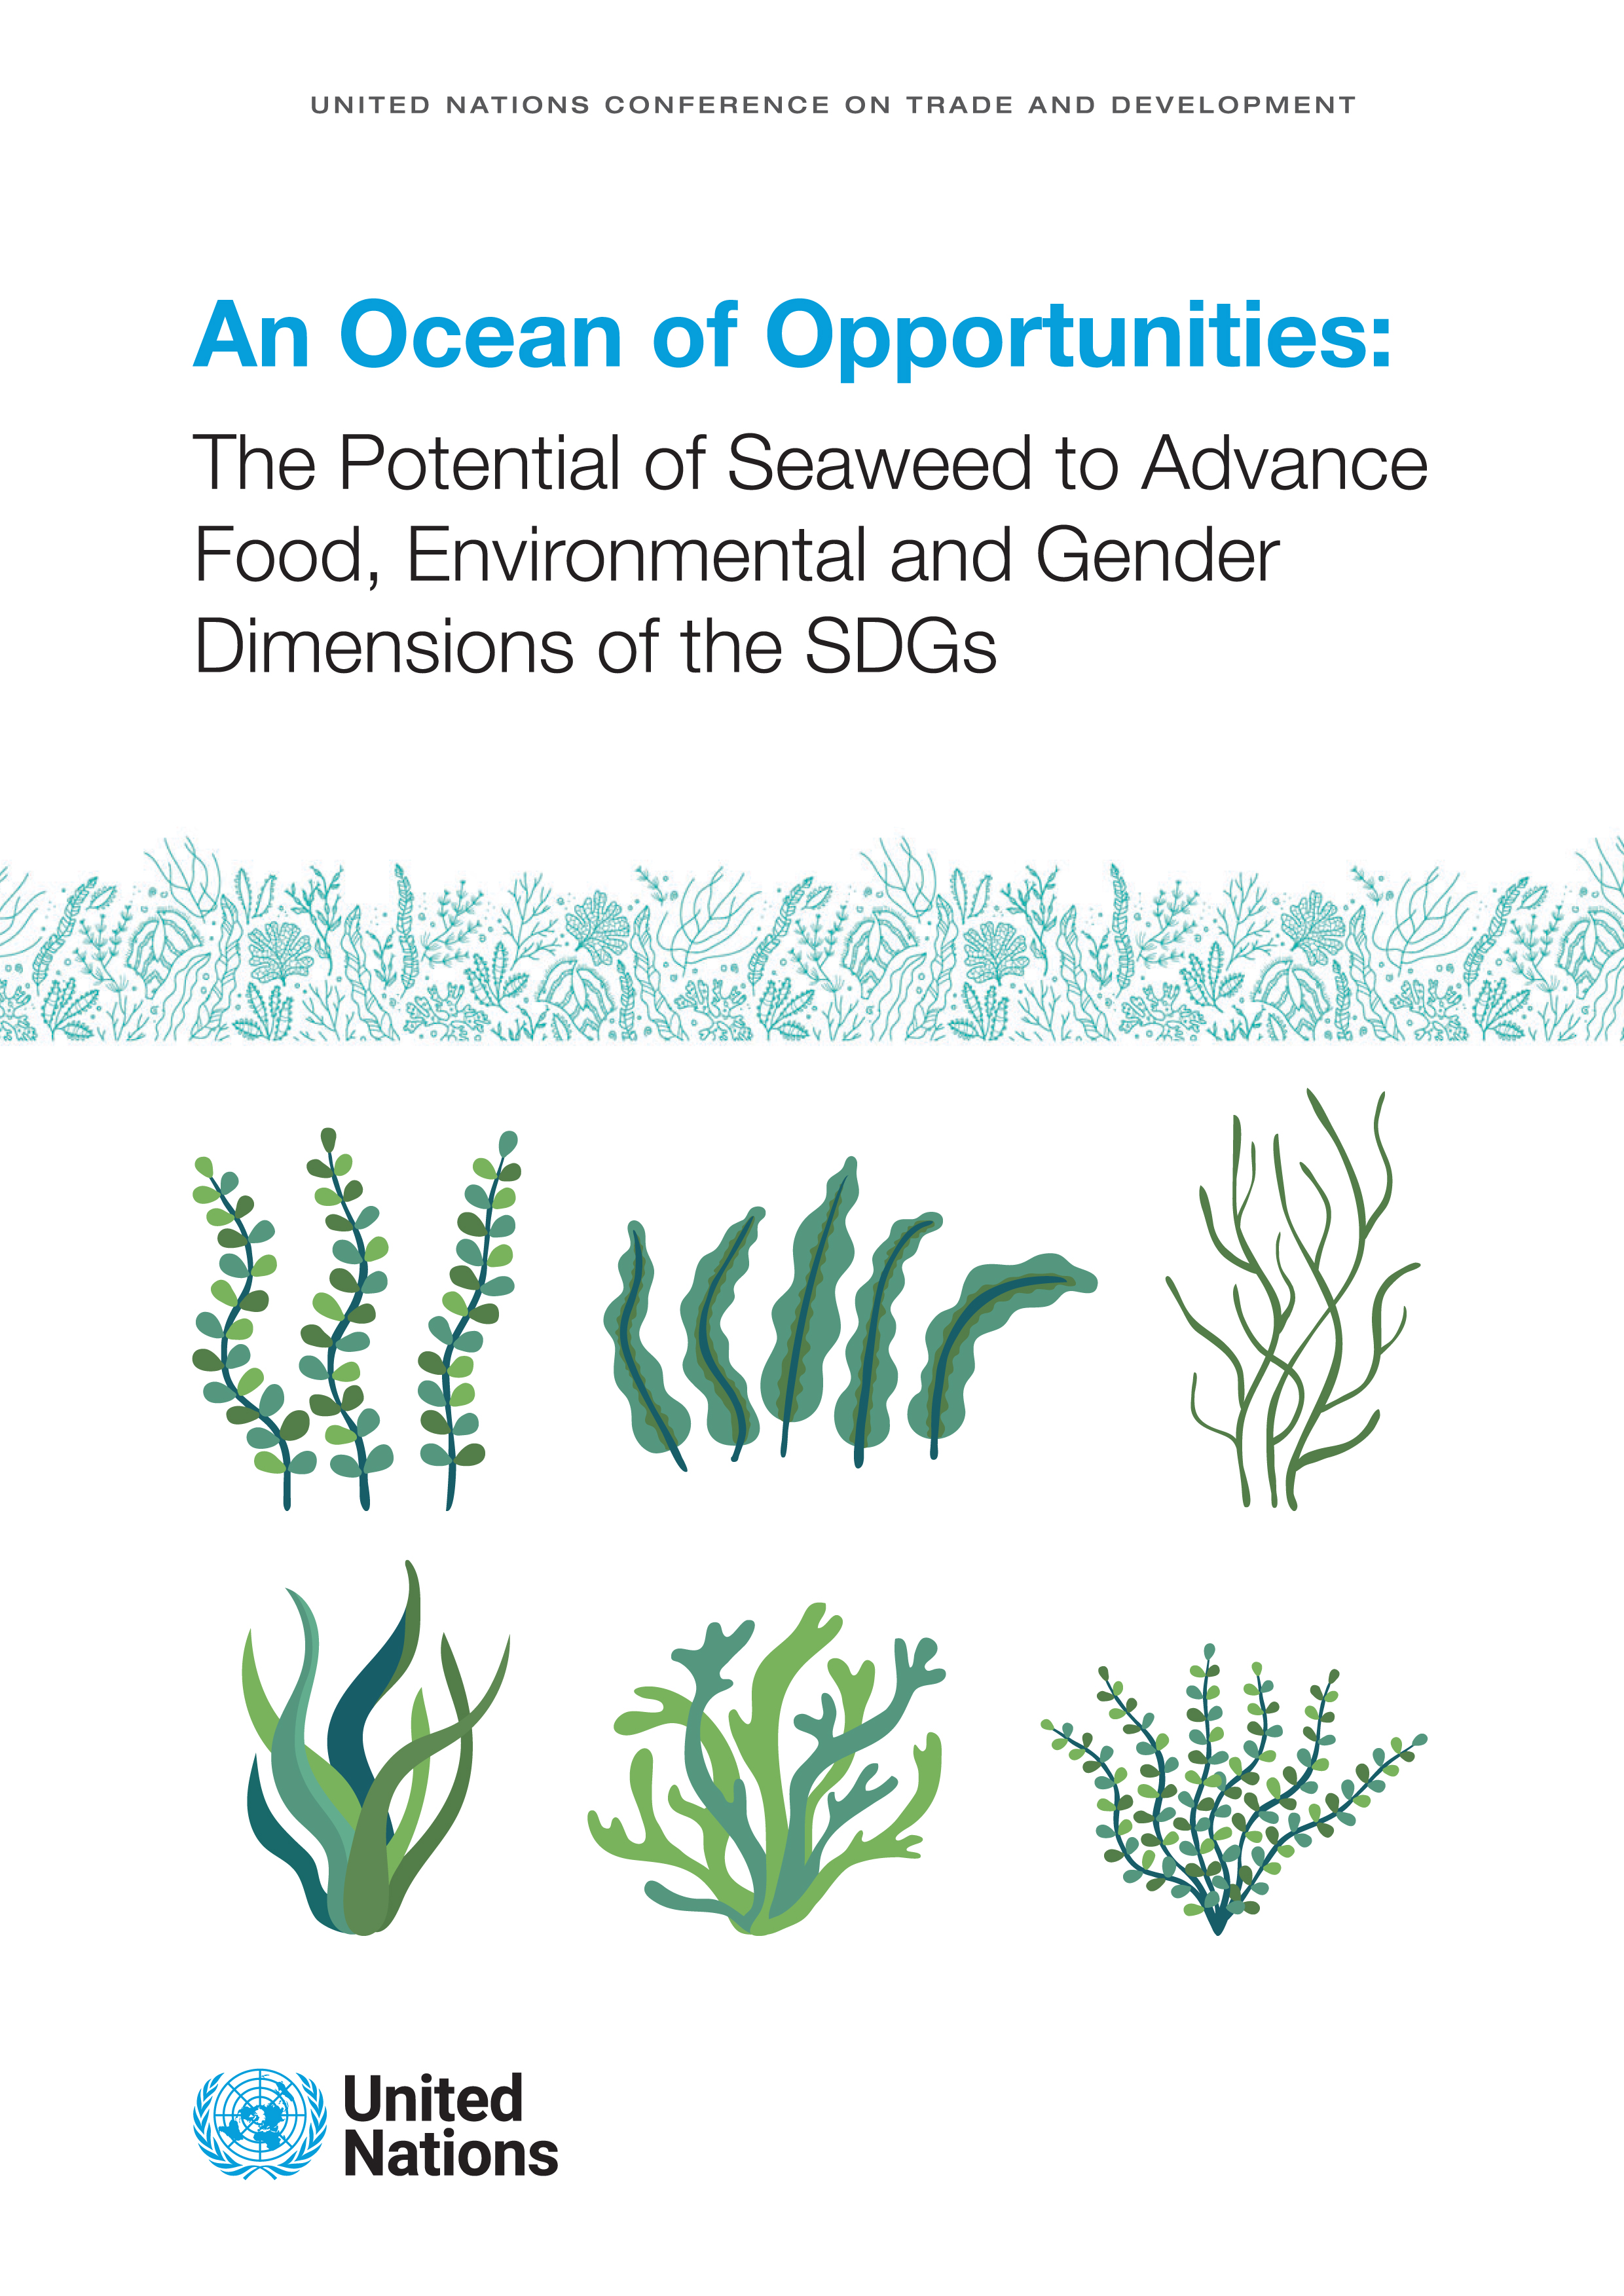 image of An Ocean of Opportunities: The Potential of Seaweed to Advance Food, Environmental and Gender Dimensions of the SDGs